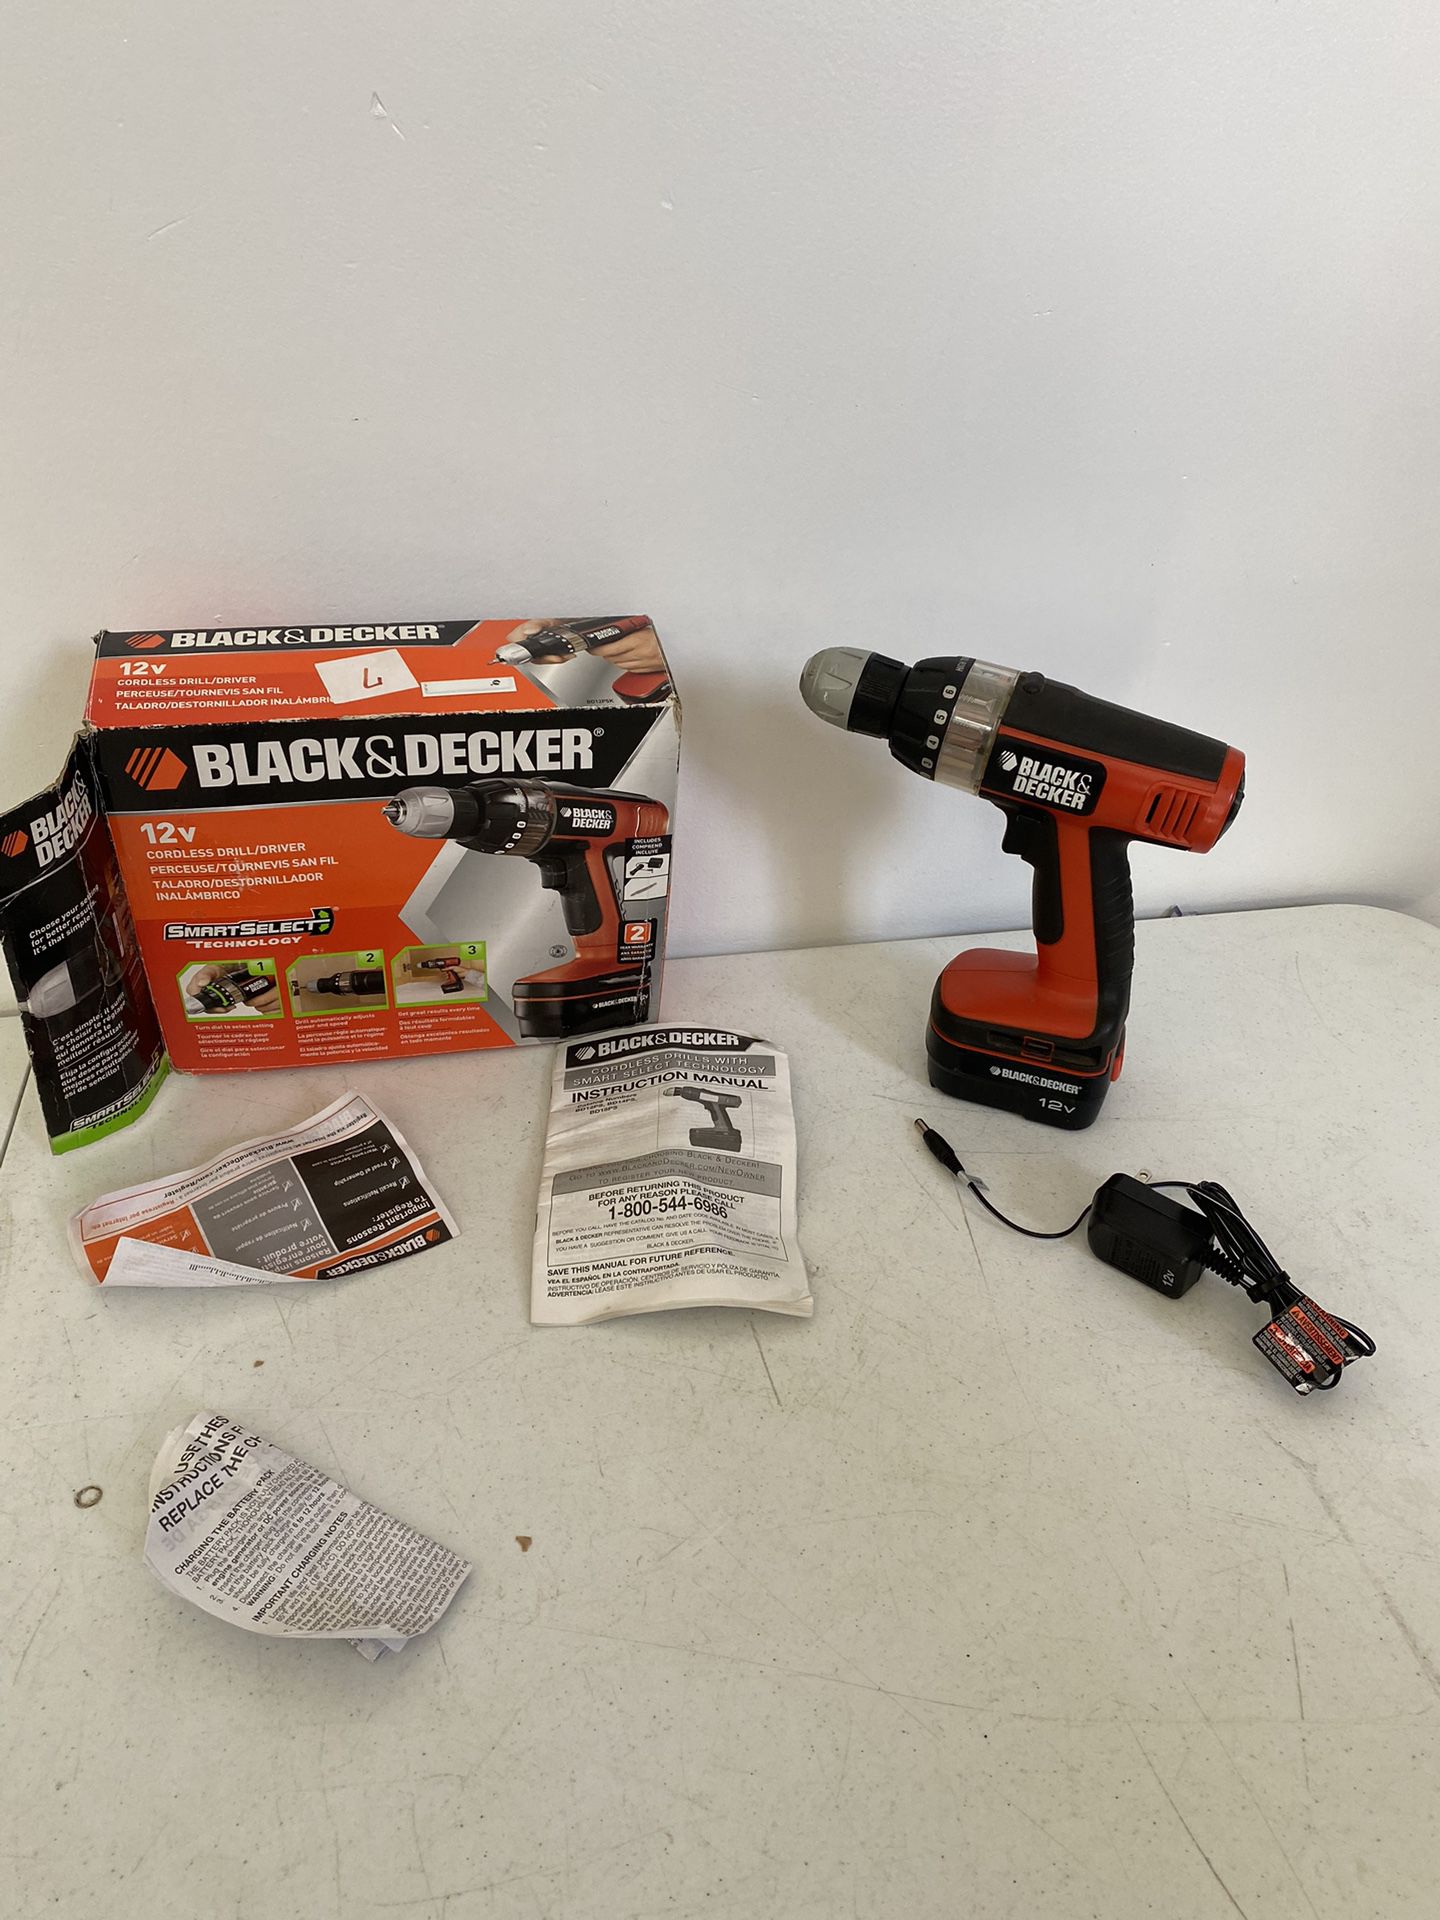 Black & Decker 12V Cordless Drill Drill with battery and charger